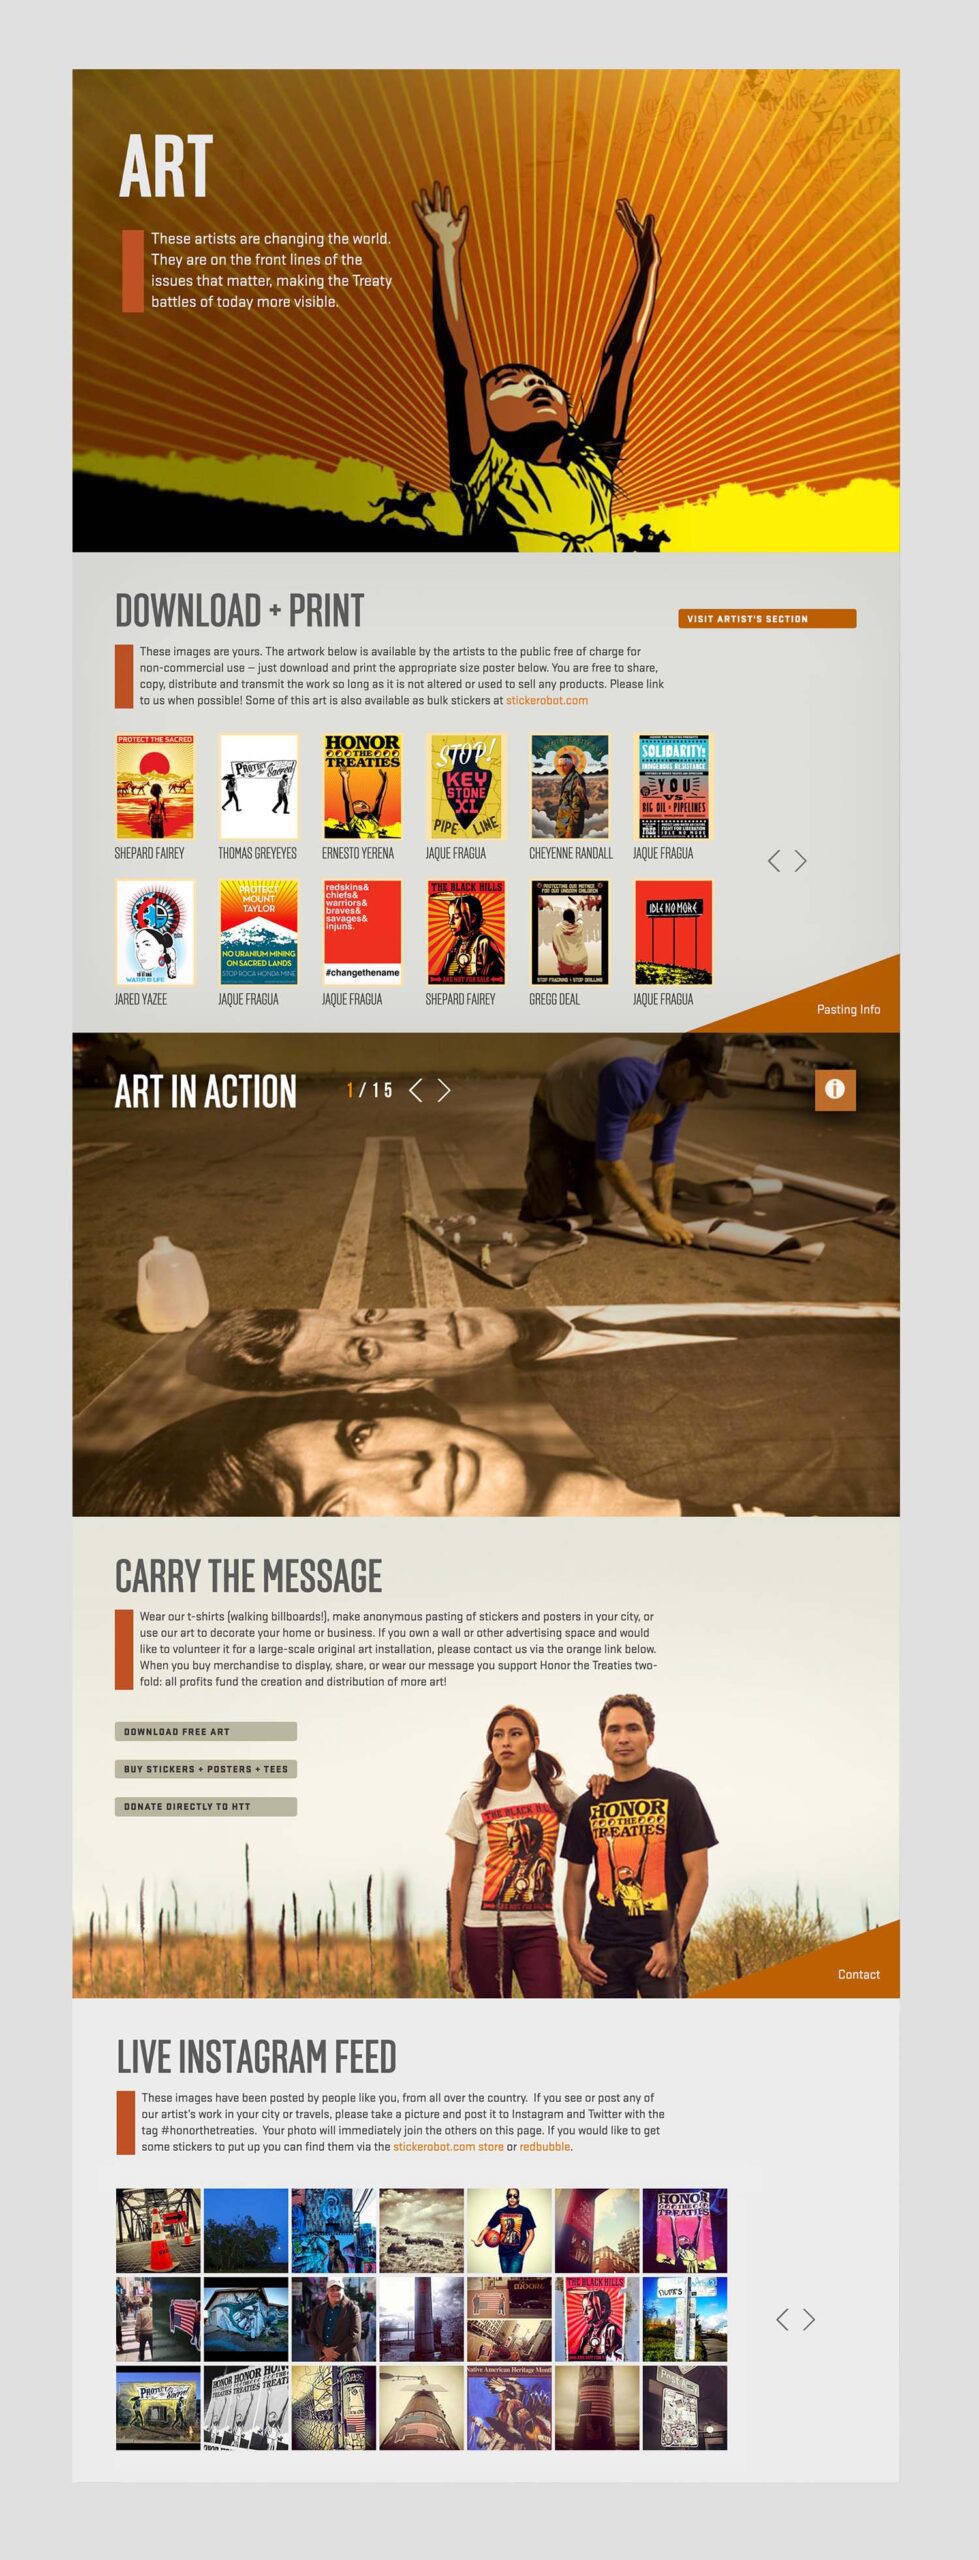 ip honor the treaties website art section design by Design Direction llc scaled